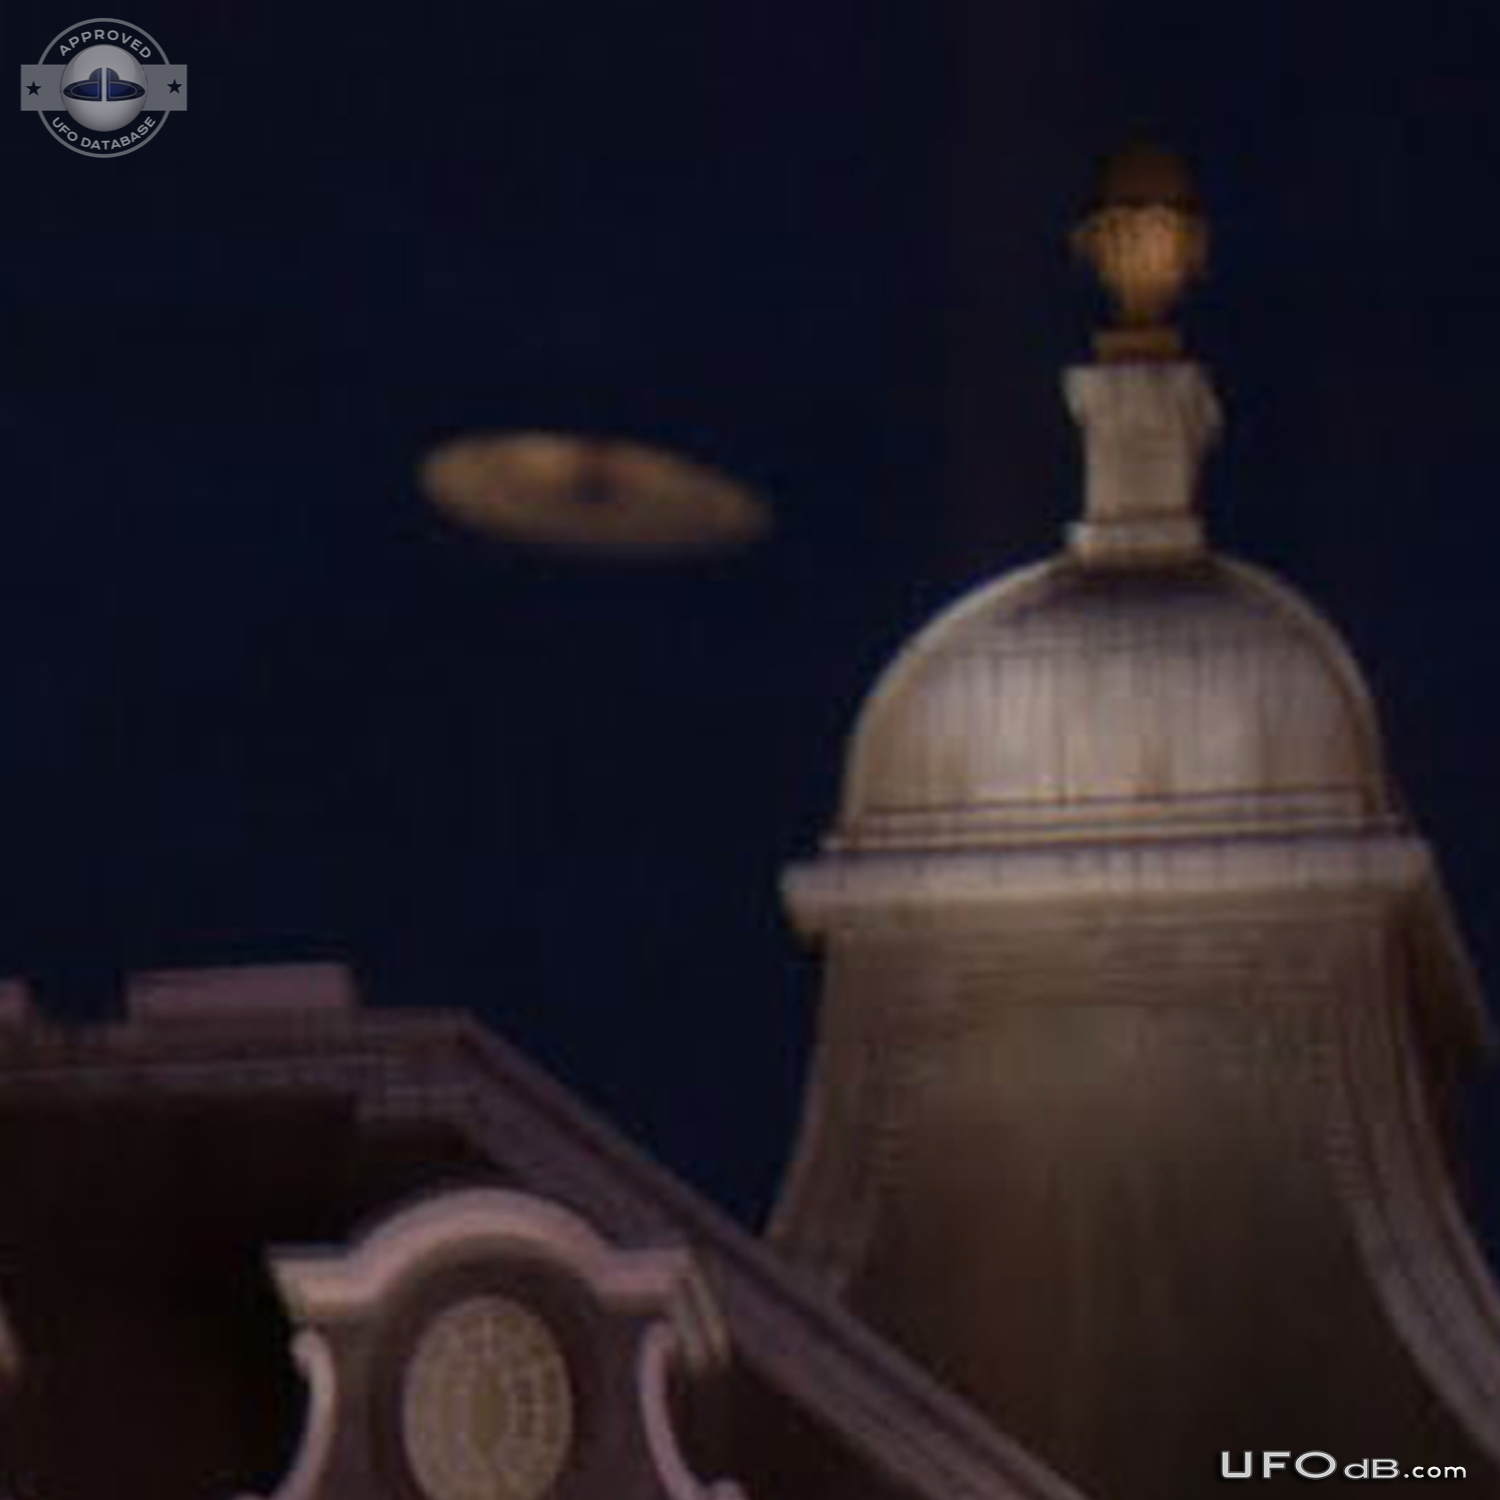 London Trip picture reveal Saucer with dome UFO - July 2010 UFO Picture #624-4